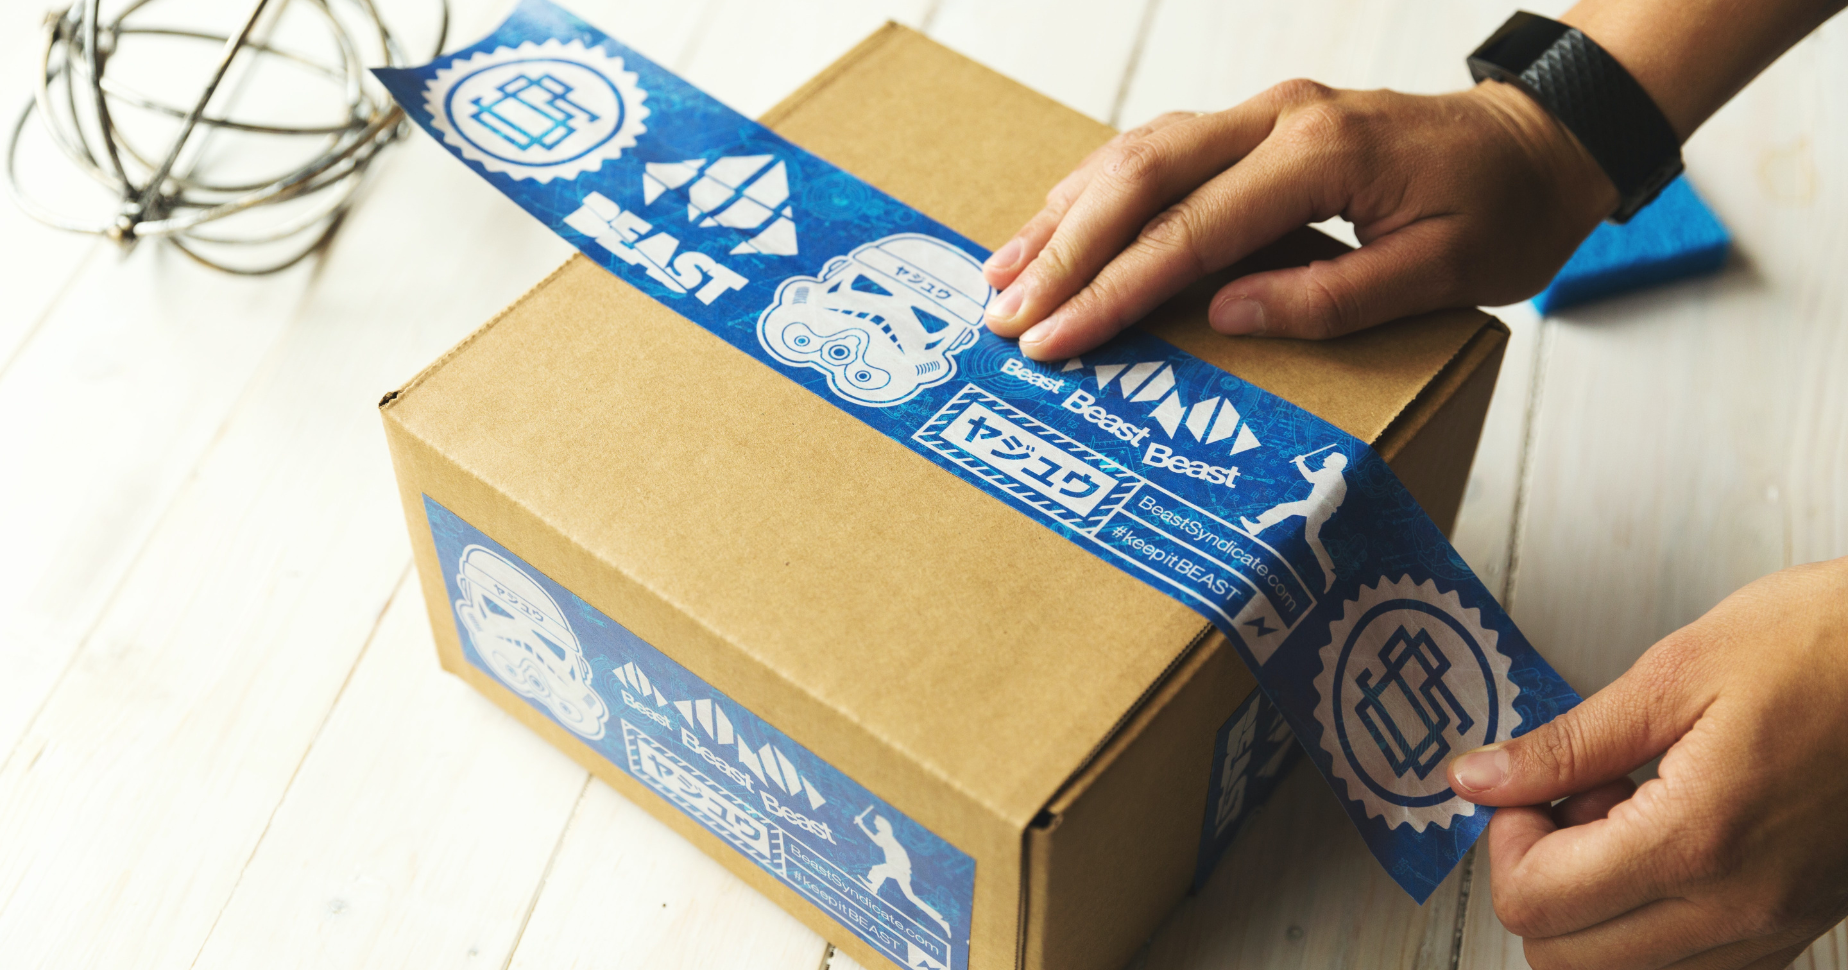 Cheapest Way to Ship a Package: Beginners Guide (2022) - Shopify USA